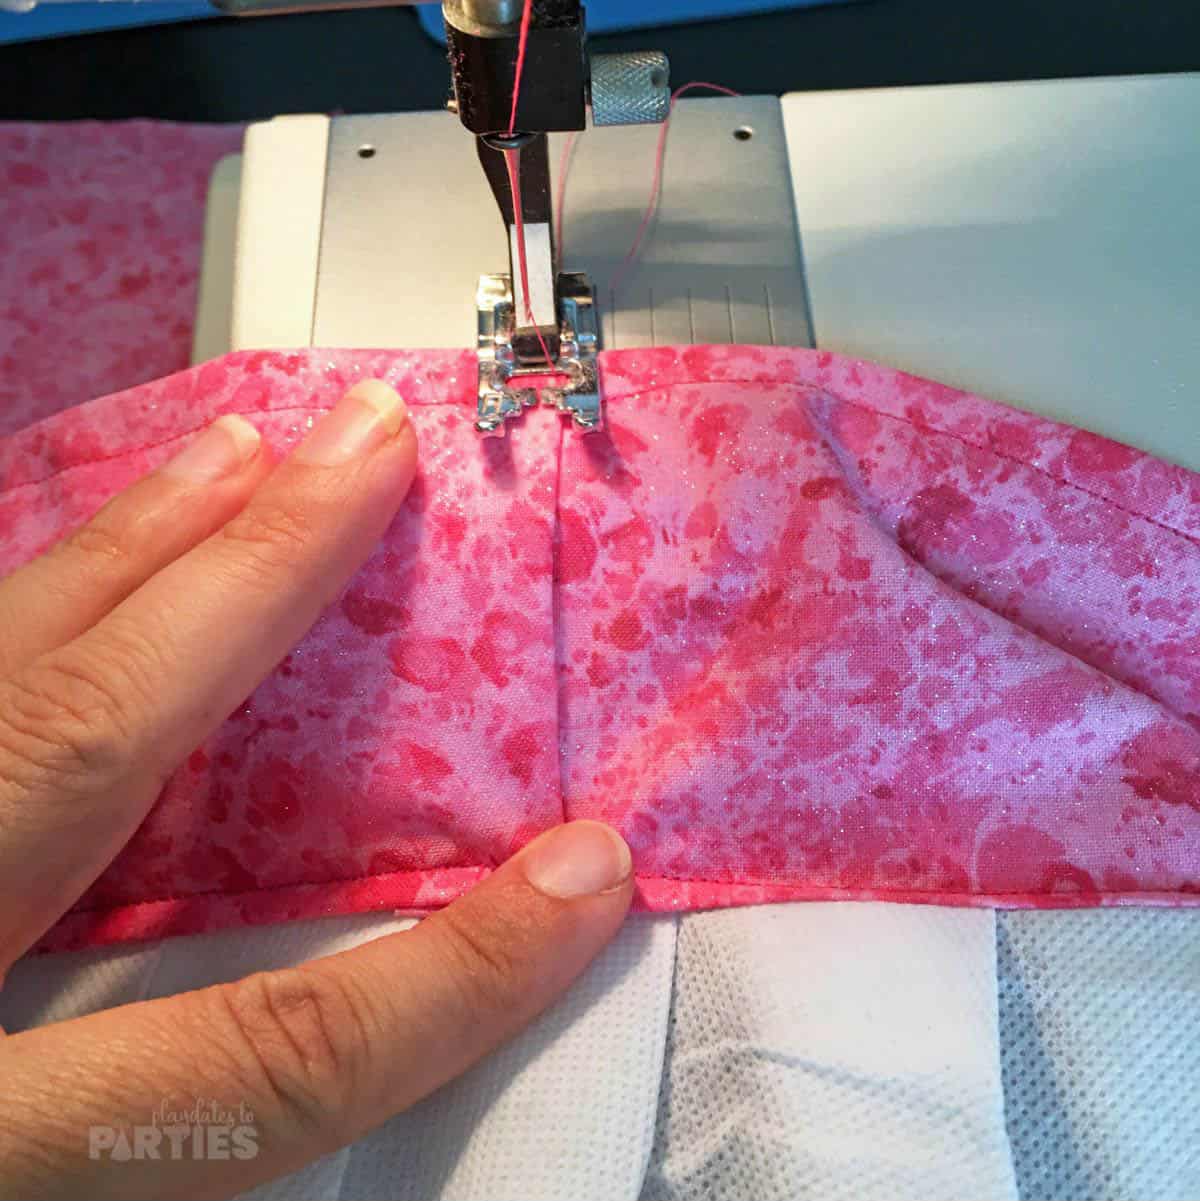 Sewing the ends of a fabric band together.